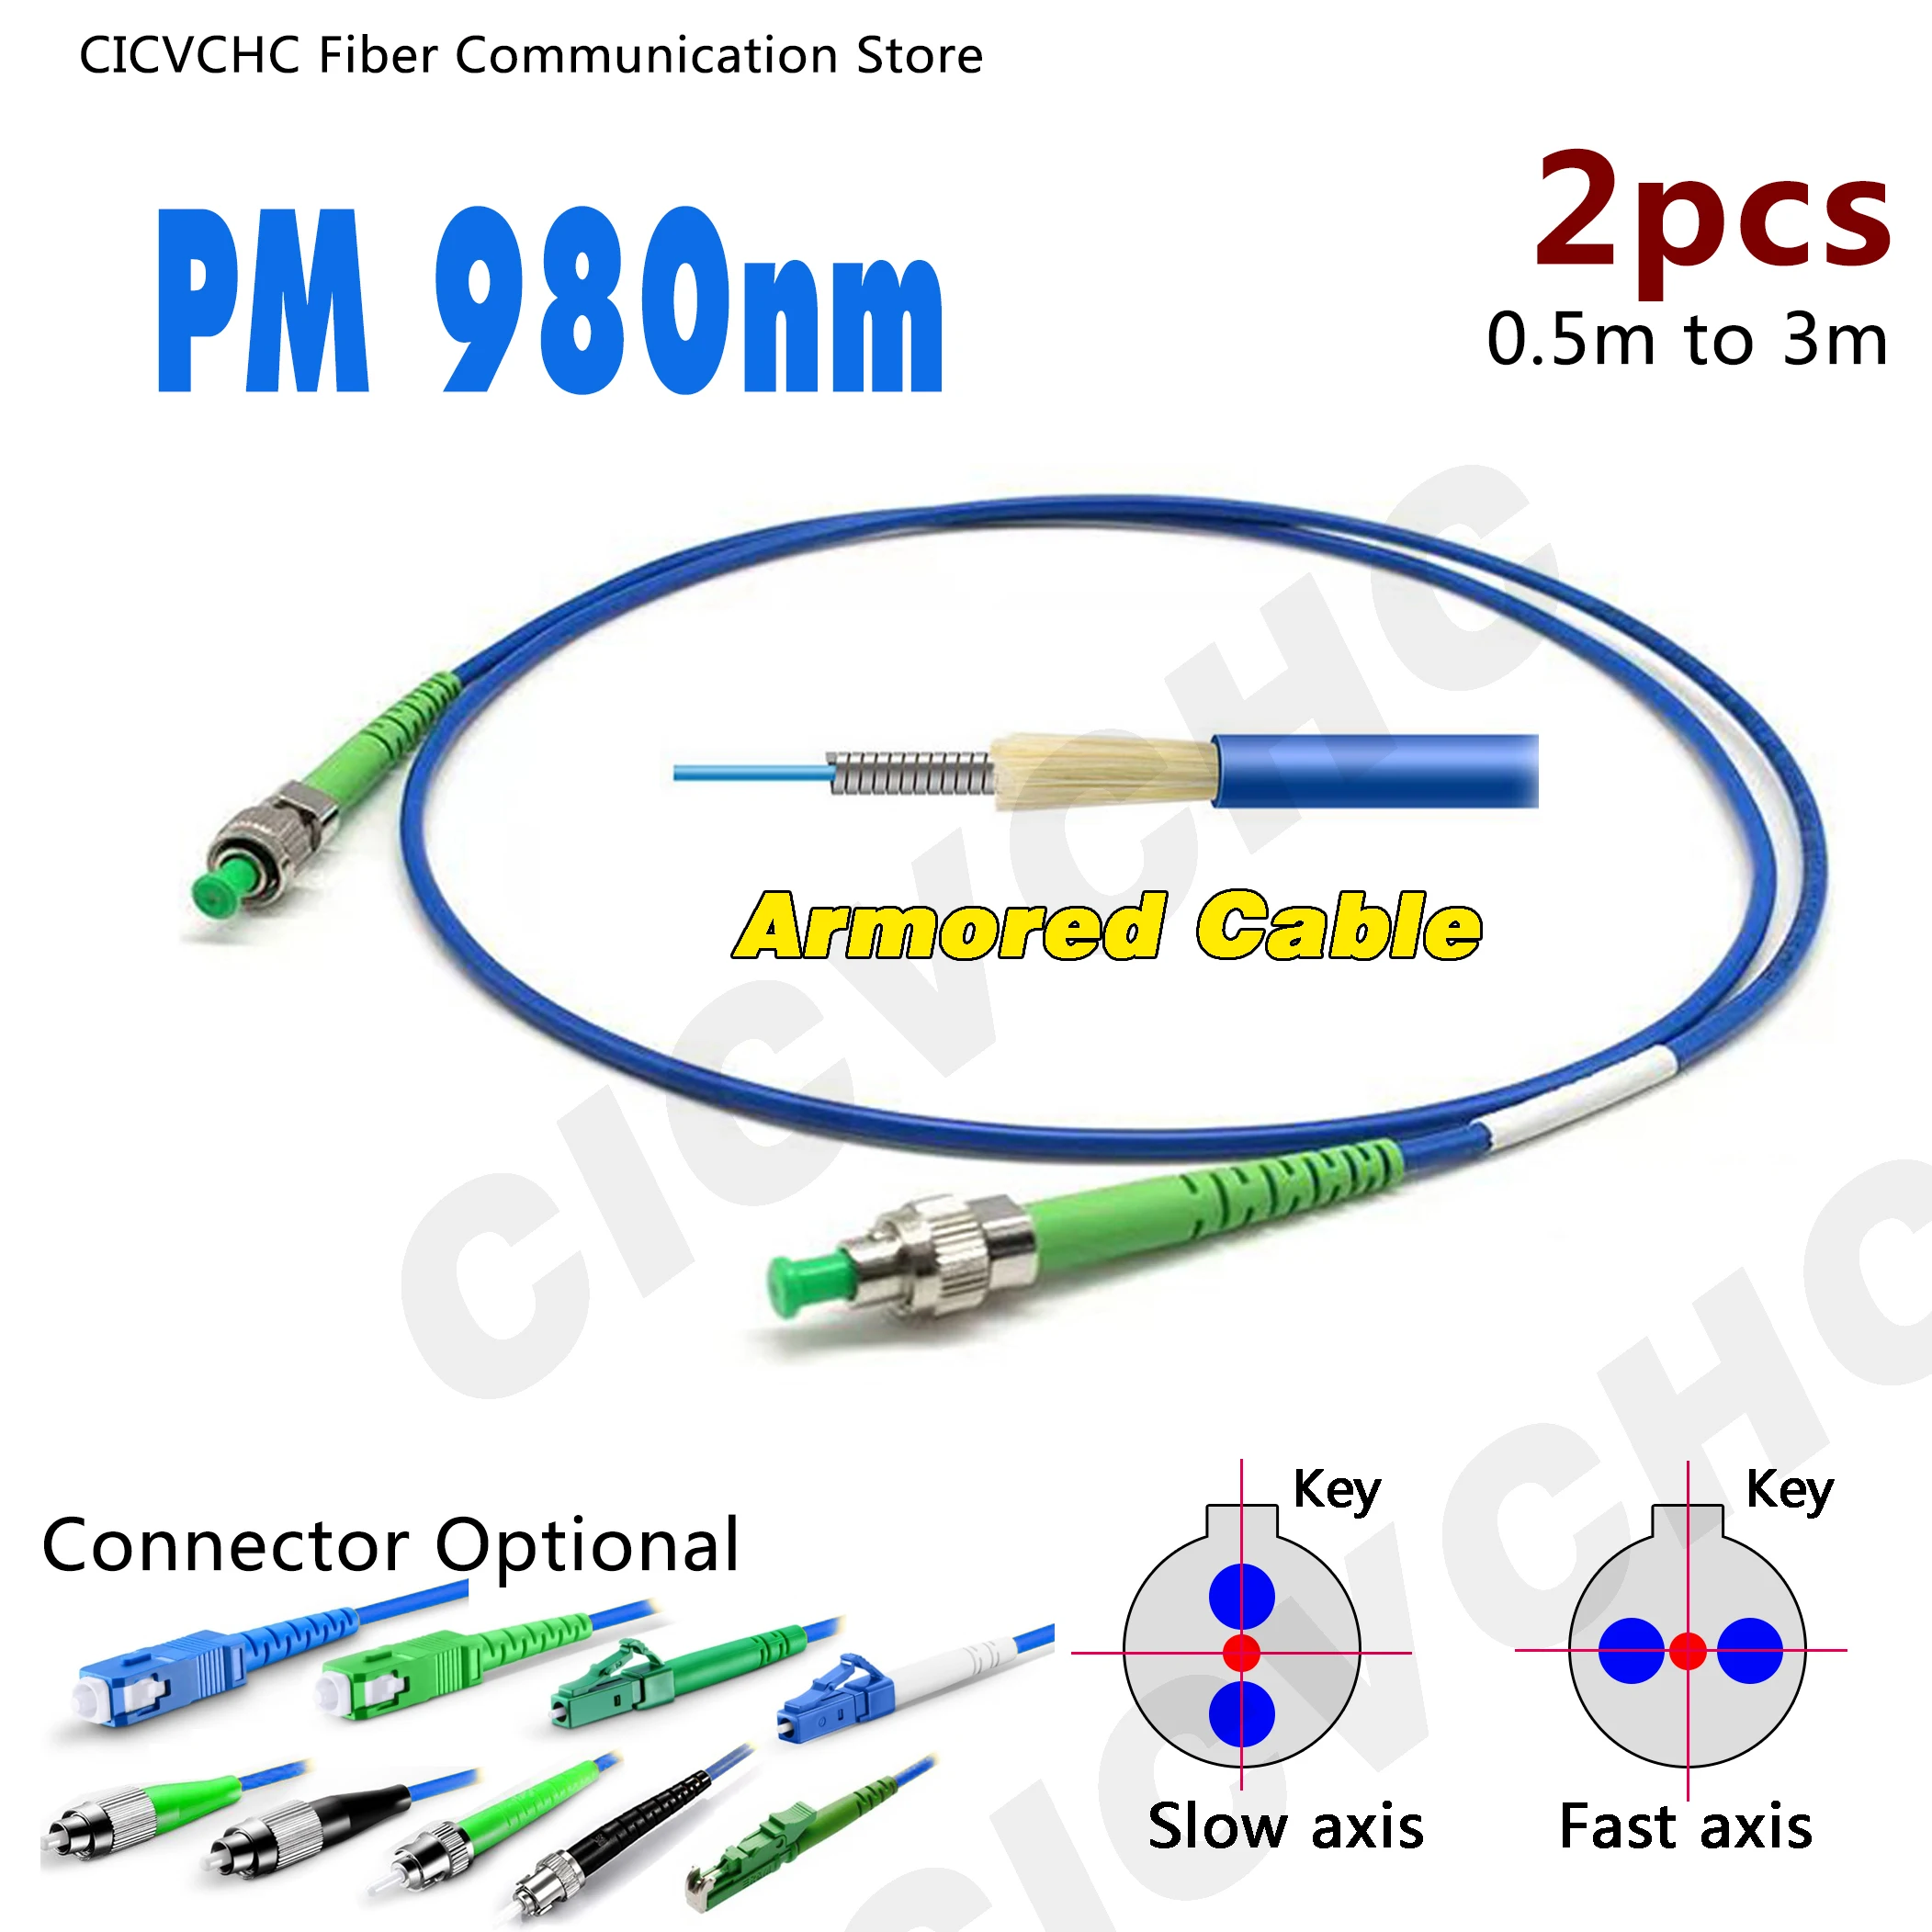 2pcs PM 980nm Fiber Patchcord-SC, FC, LC, ST-Fast or Slow-3.0mm Armored Cable-Polarization Maintaining-Panda Fber-0.5m to 3m